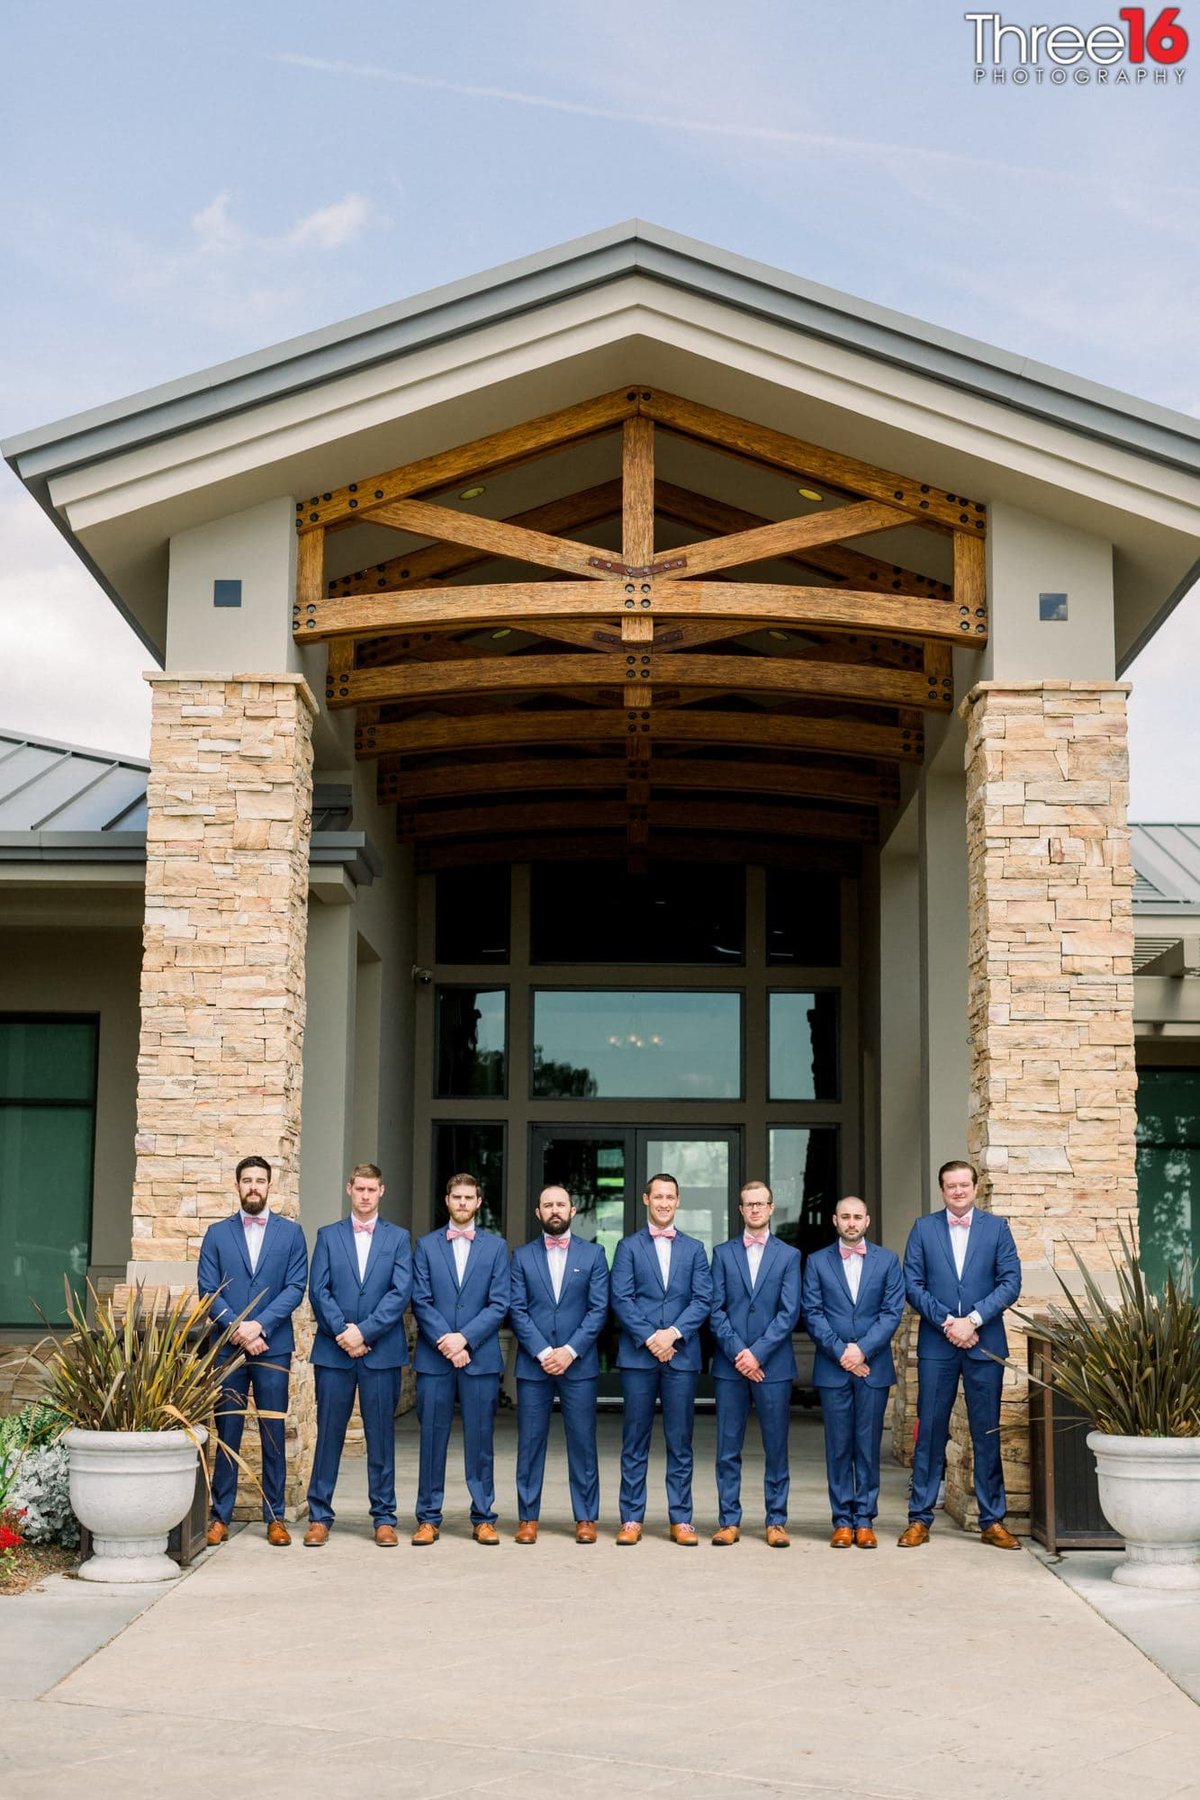 Groomsmen line up in their blue suits in front of the Black Gold Golf Course entrance